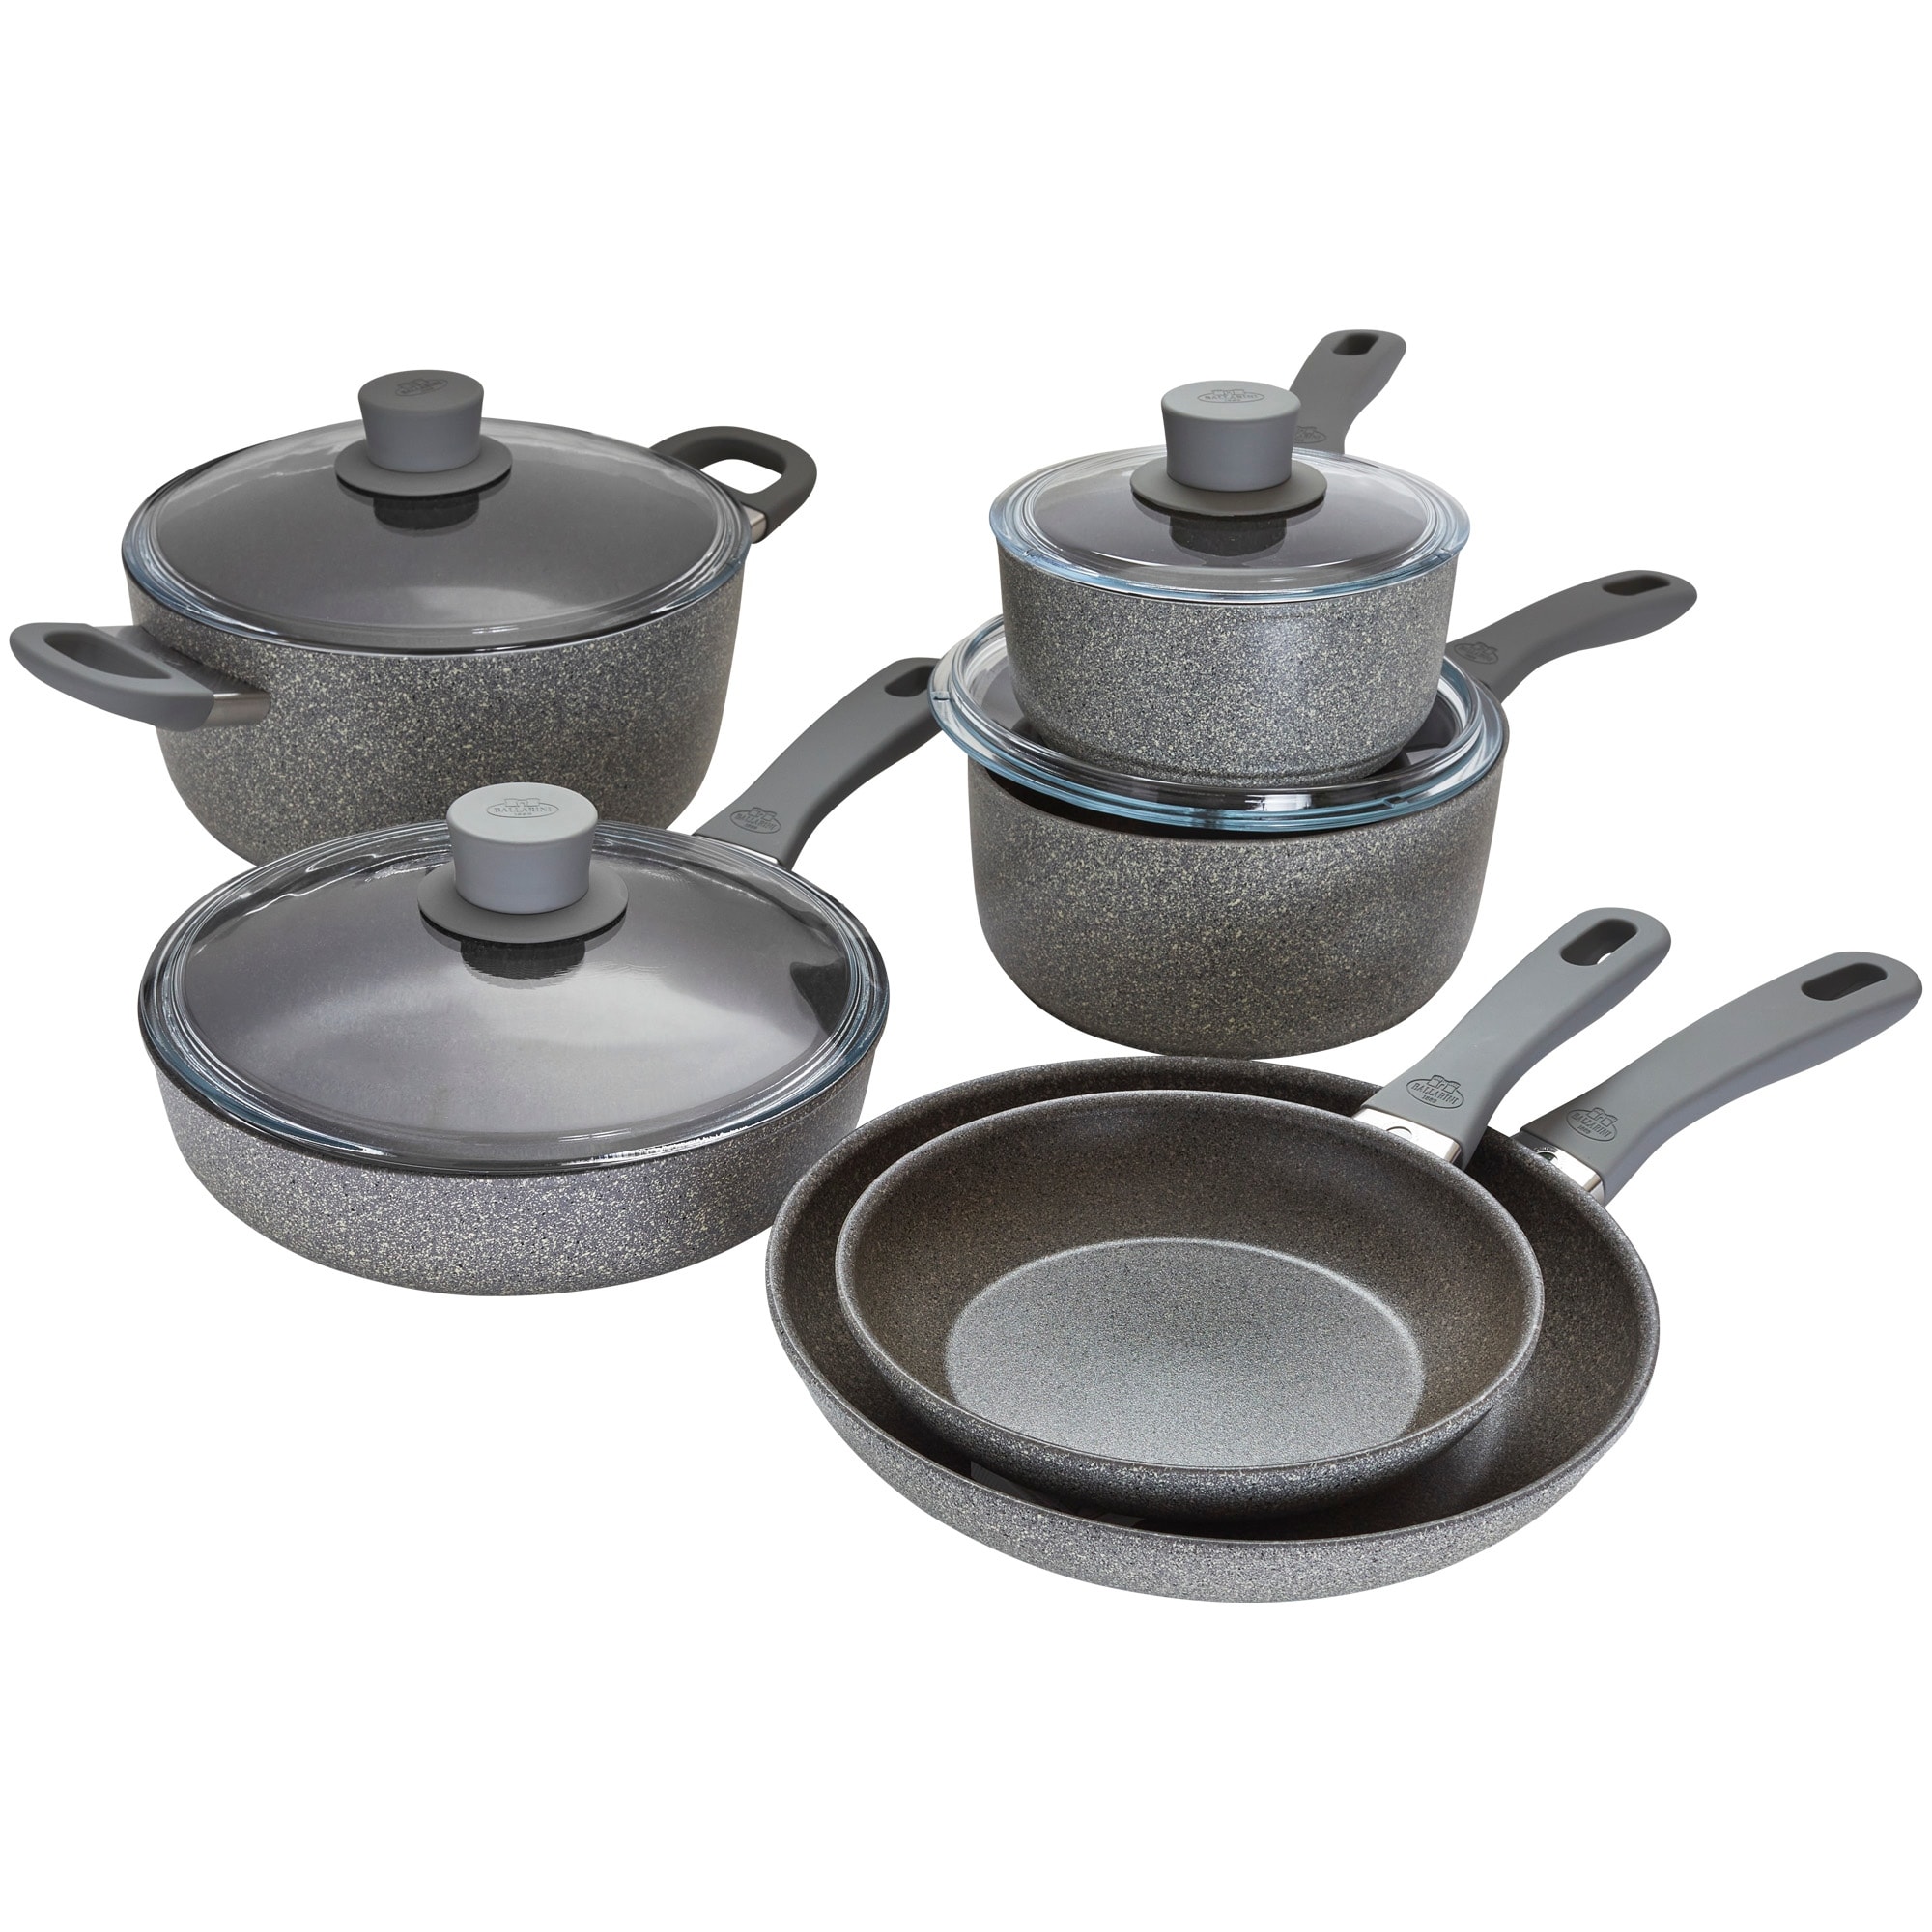 10 Pc Cold-Forged Induction Ceramic Cookware Set - Black